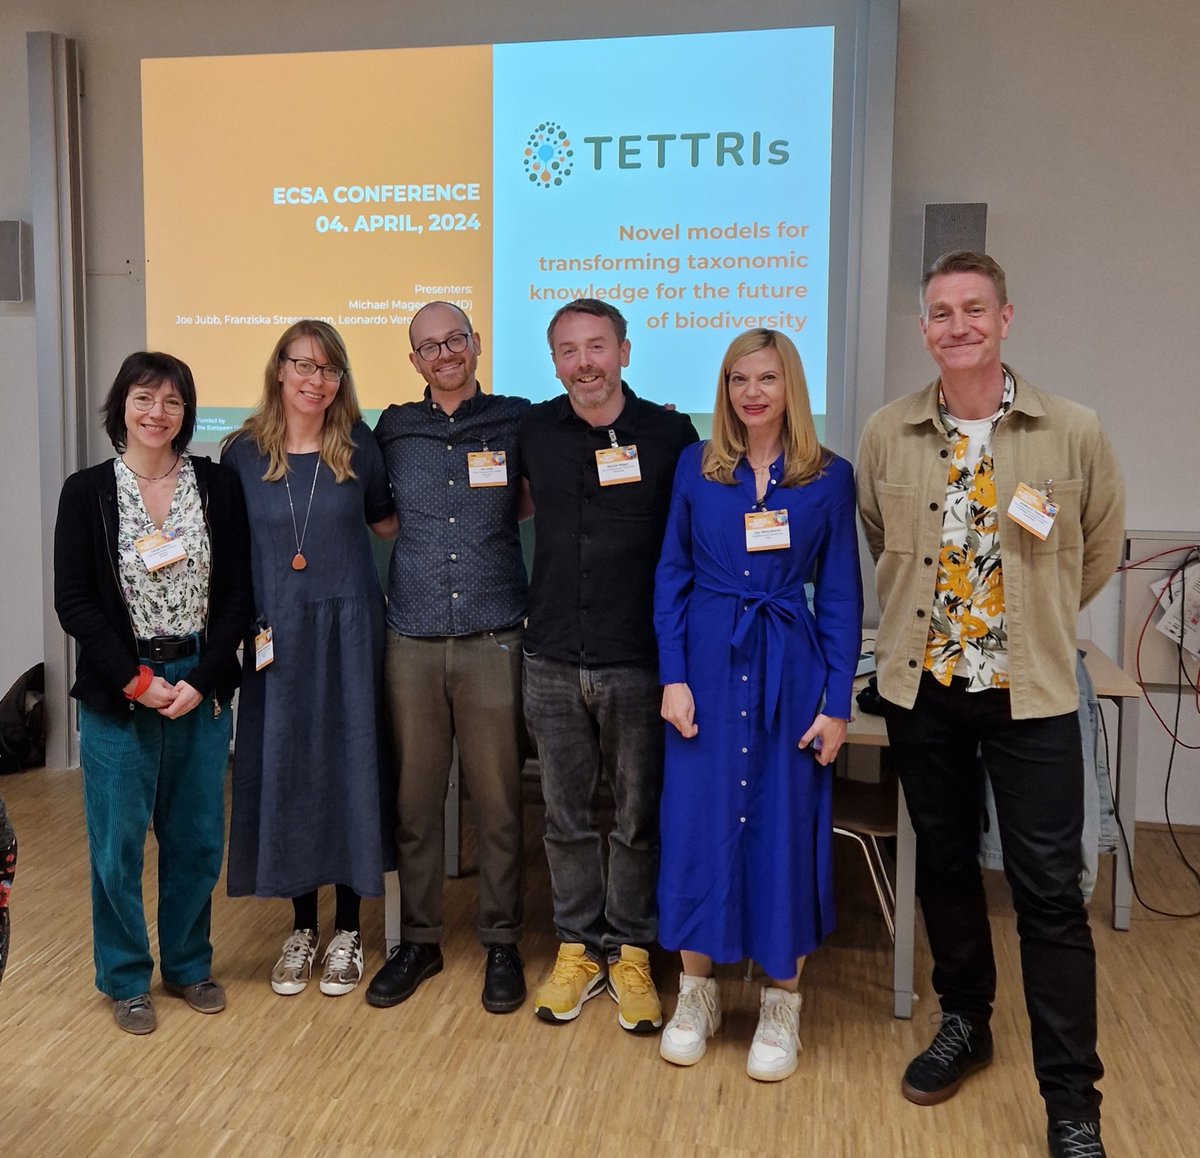 @EuCitSci conference is on day 2 in Vienna. This morning we held a #TETTRIsEU workshop on novel methods of engagement #CitizenScientists with #taxonomy. This is important for monitoring #biodiversity and transferring knowledge to the next generation of #taxonomists #ECSA2024